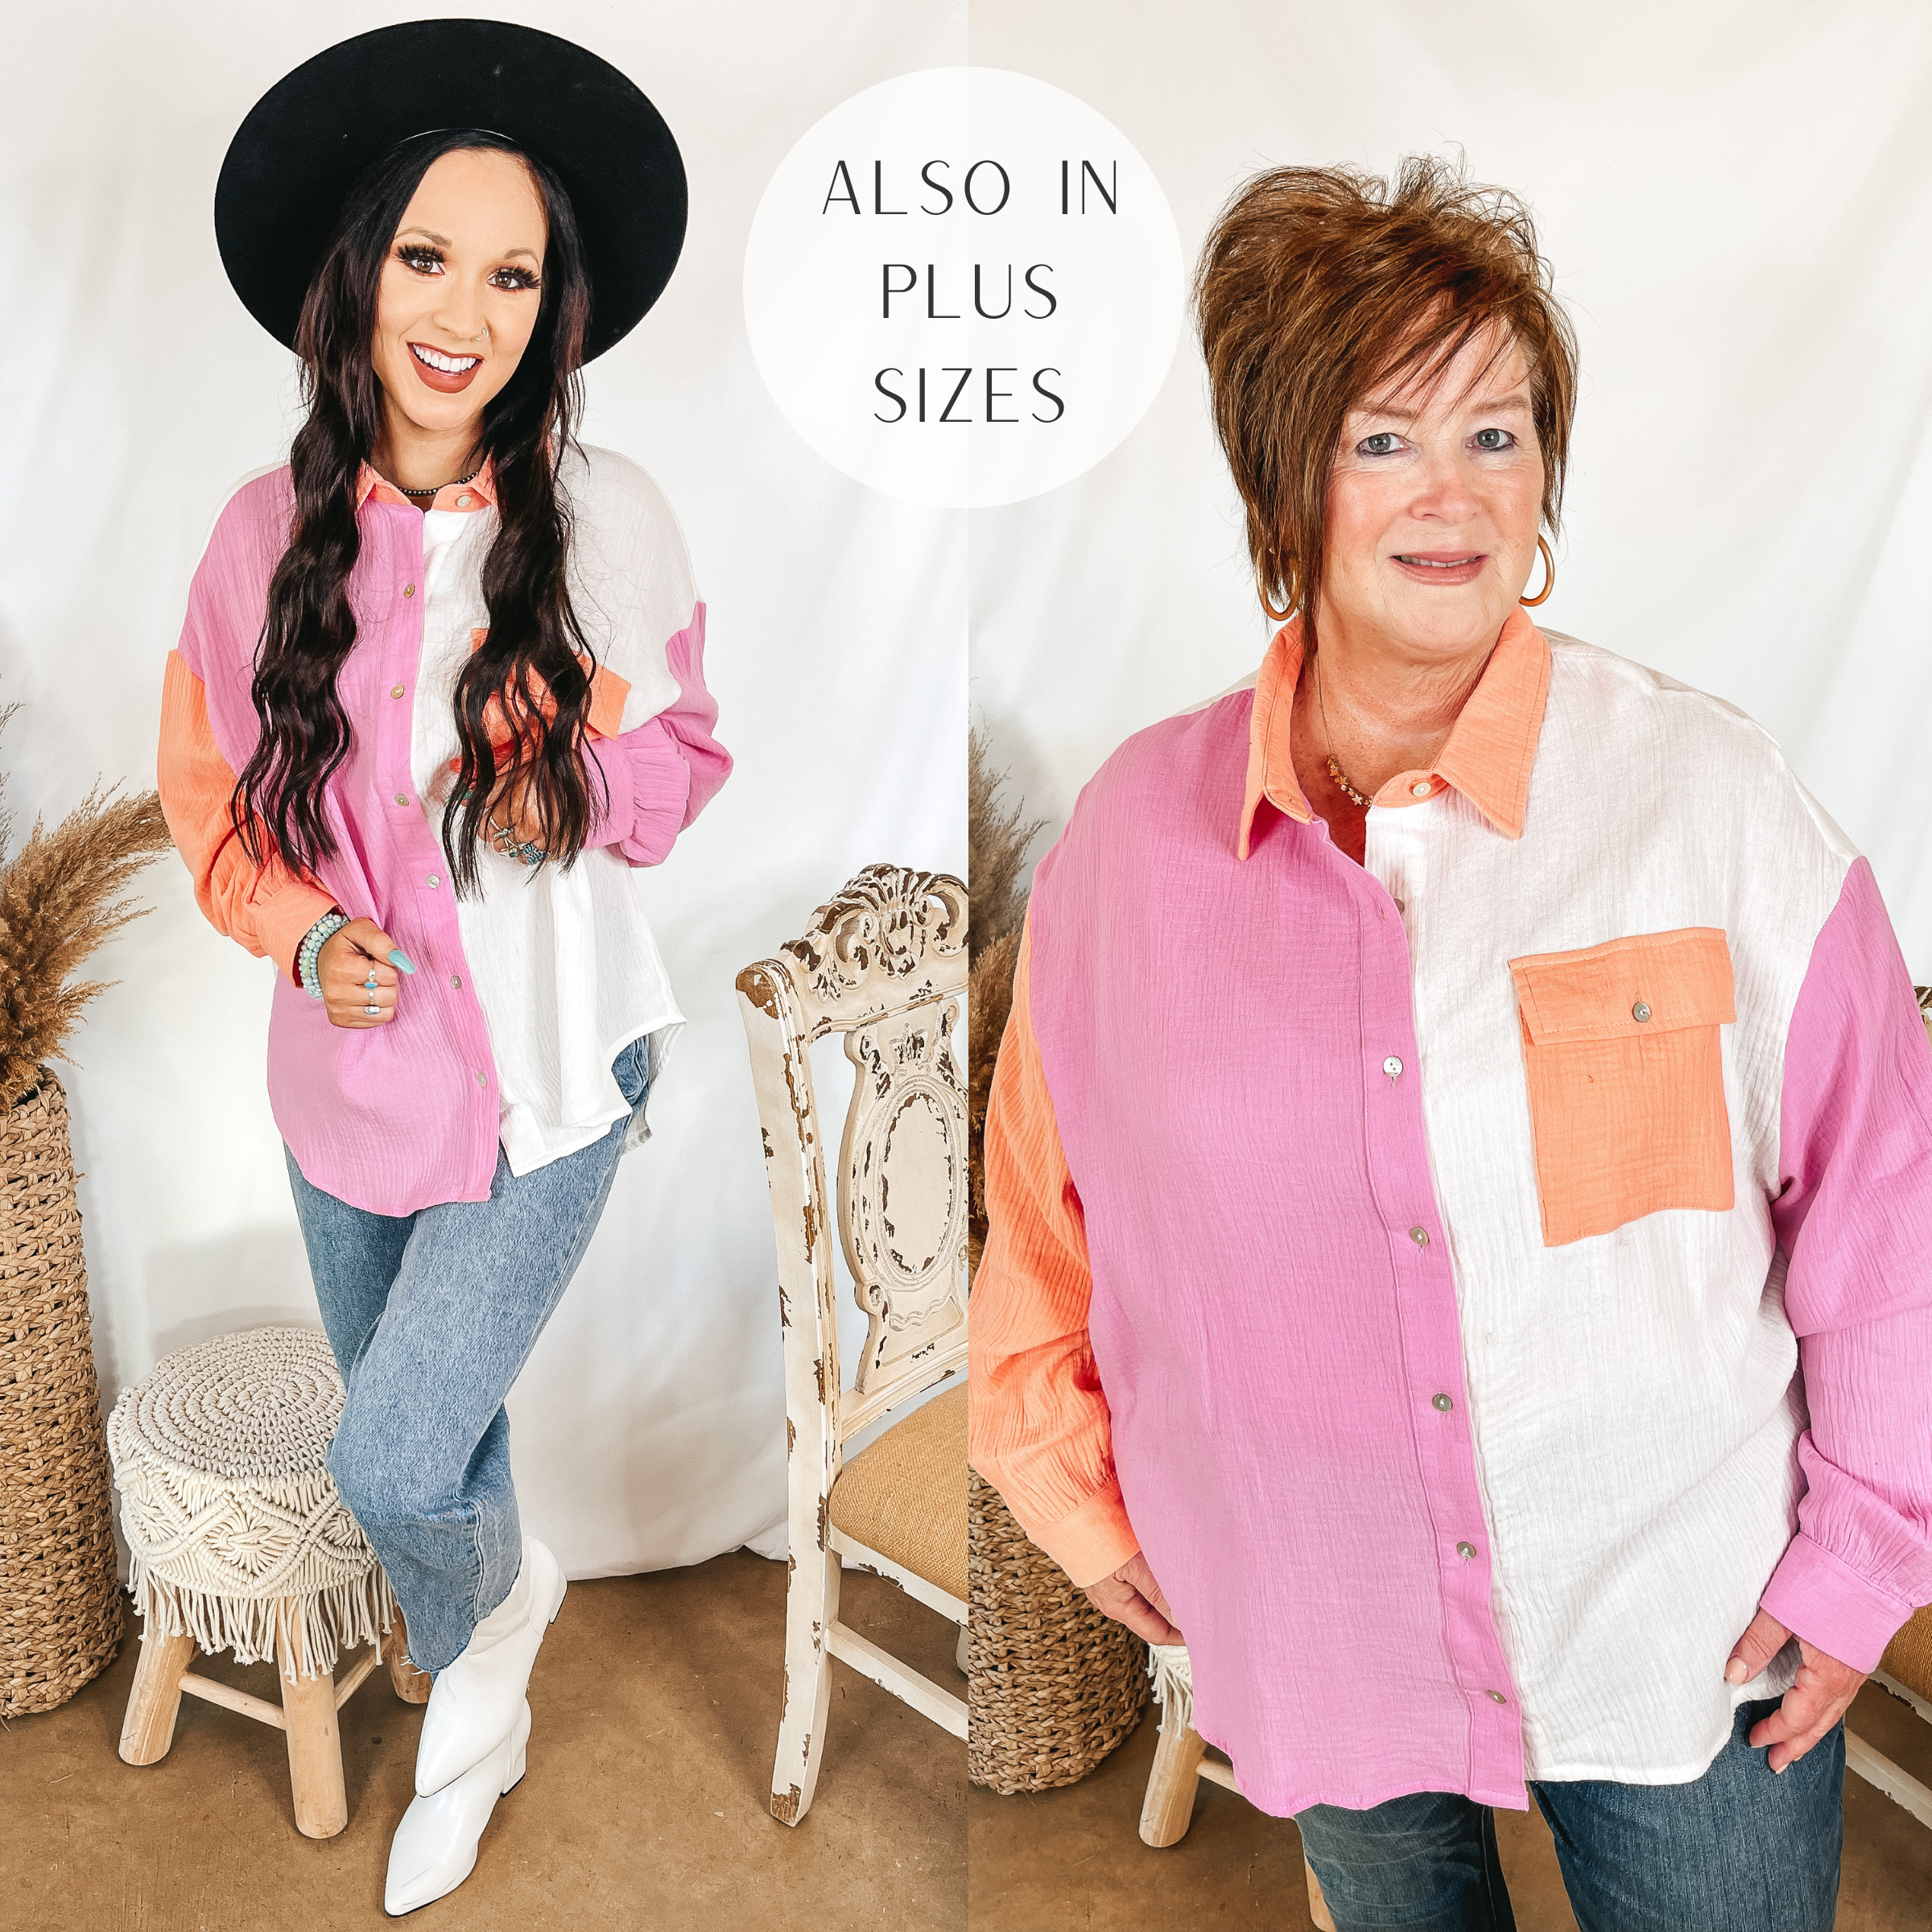 Models are wearing a button up top that is white, pink, and orange. Size small model has it paired with a black hat, light wash jeans, and white booties. Plus size model has it paired with dark wash jeans.